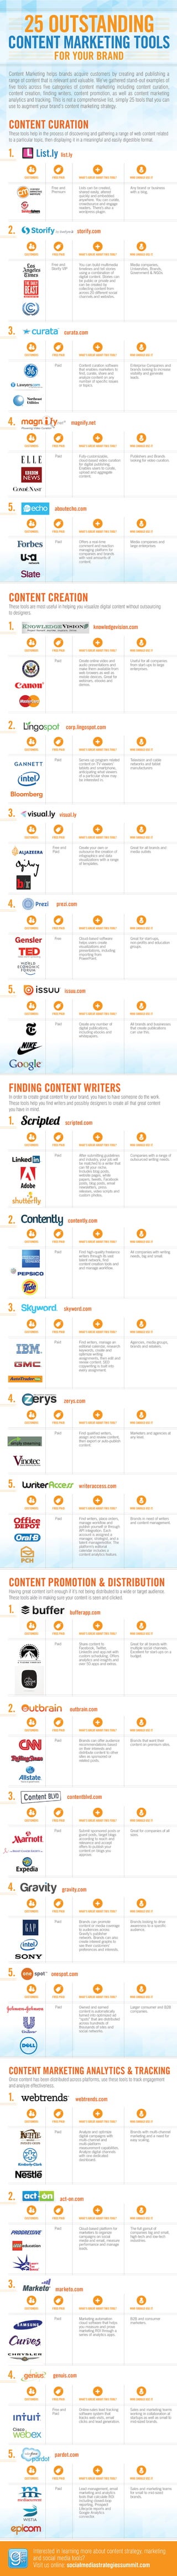 25 Outstanding Content Marketing Tools [Infographic]